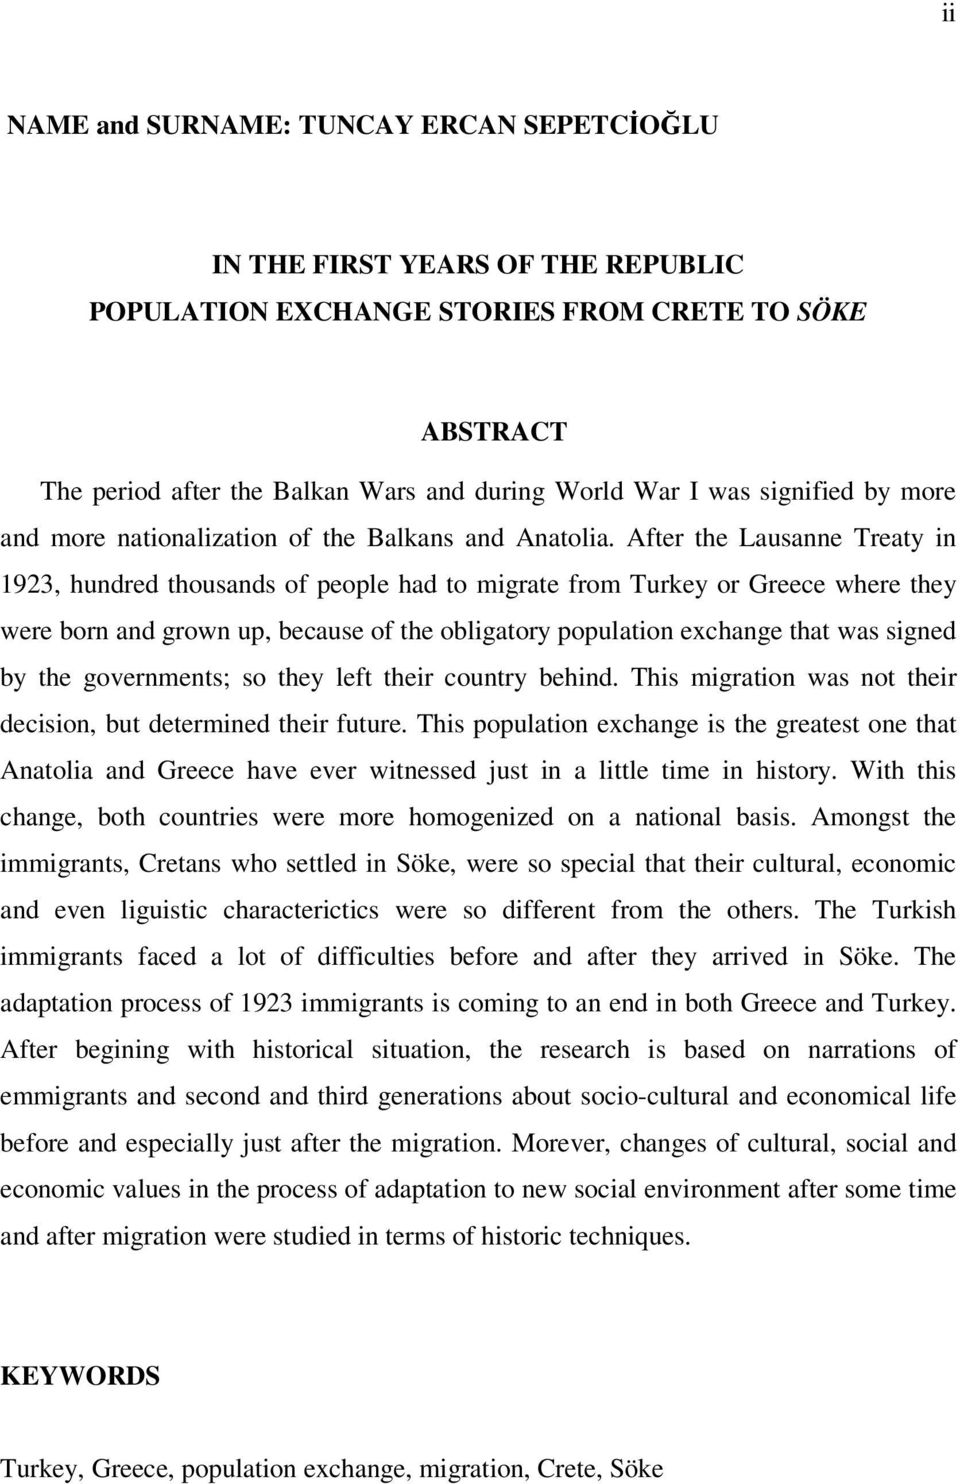 After the Lausanne Treaty in 1923, hundred thousands of people had to migrate from Turkey or Greece where they were born and grown up, because of the obligatory population exchange that was signed by